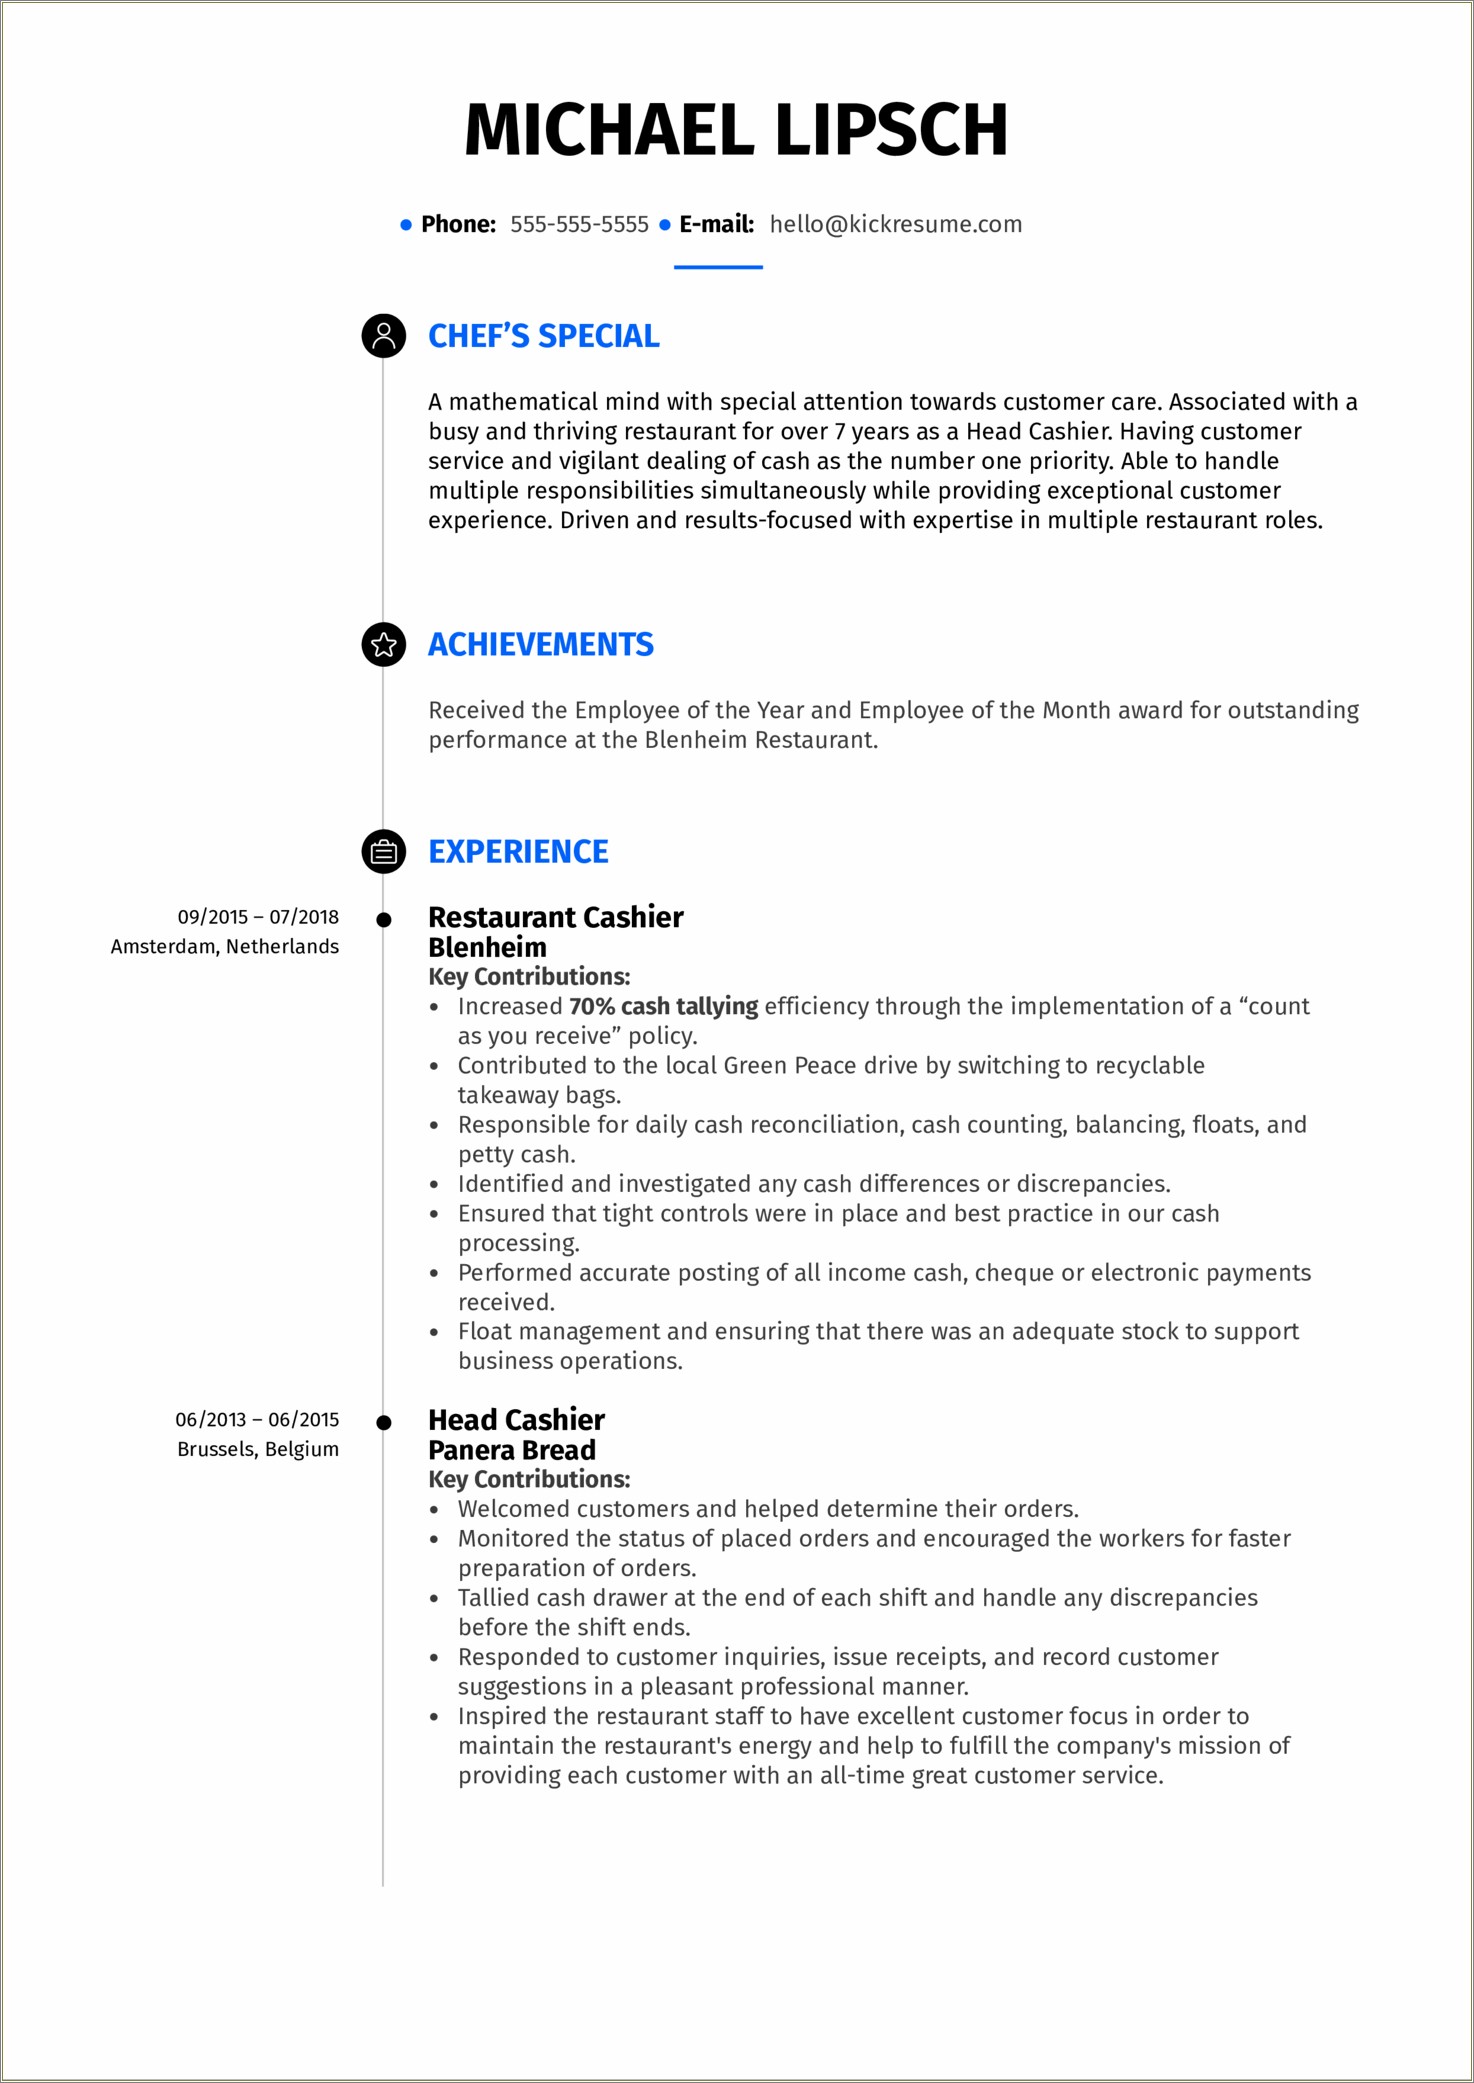 Sample Resume With Fast Food Experience